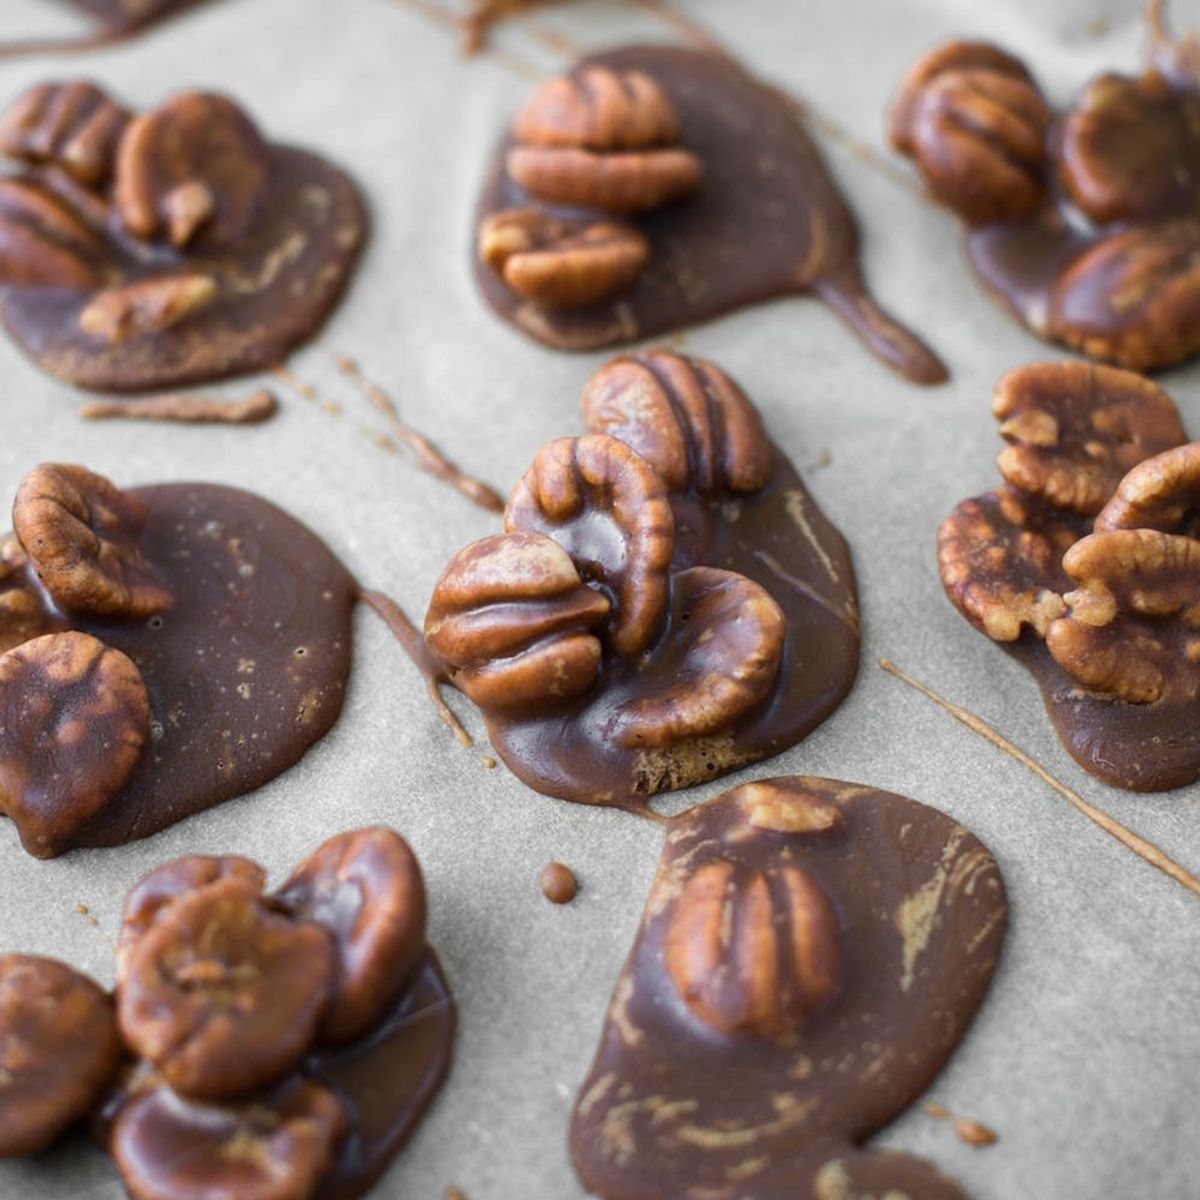 Vegan Pecan Pralines So Good, You Won’t Miss the Cream and Butter